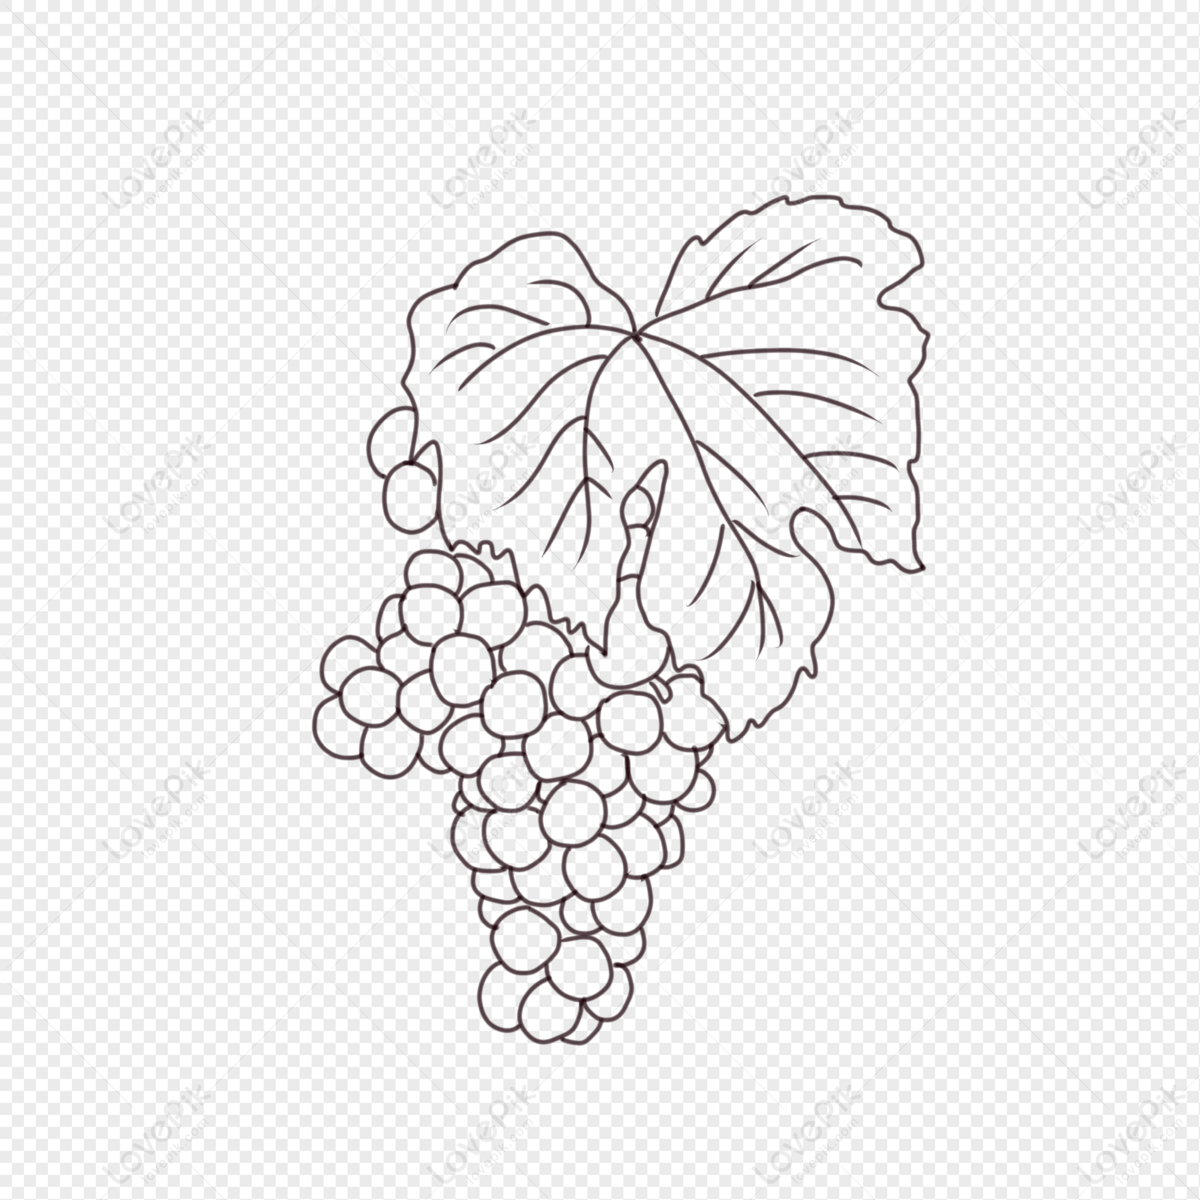 Grapes Drawing Isolated On White Background Stock Vector (Royalty Free)  621043325 | Shutterstock